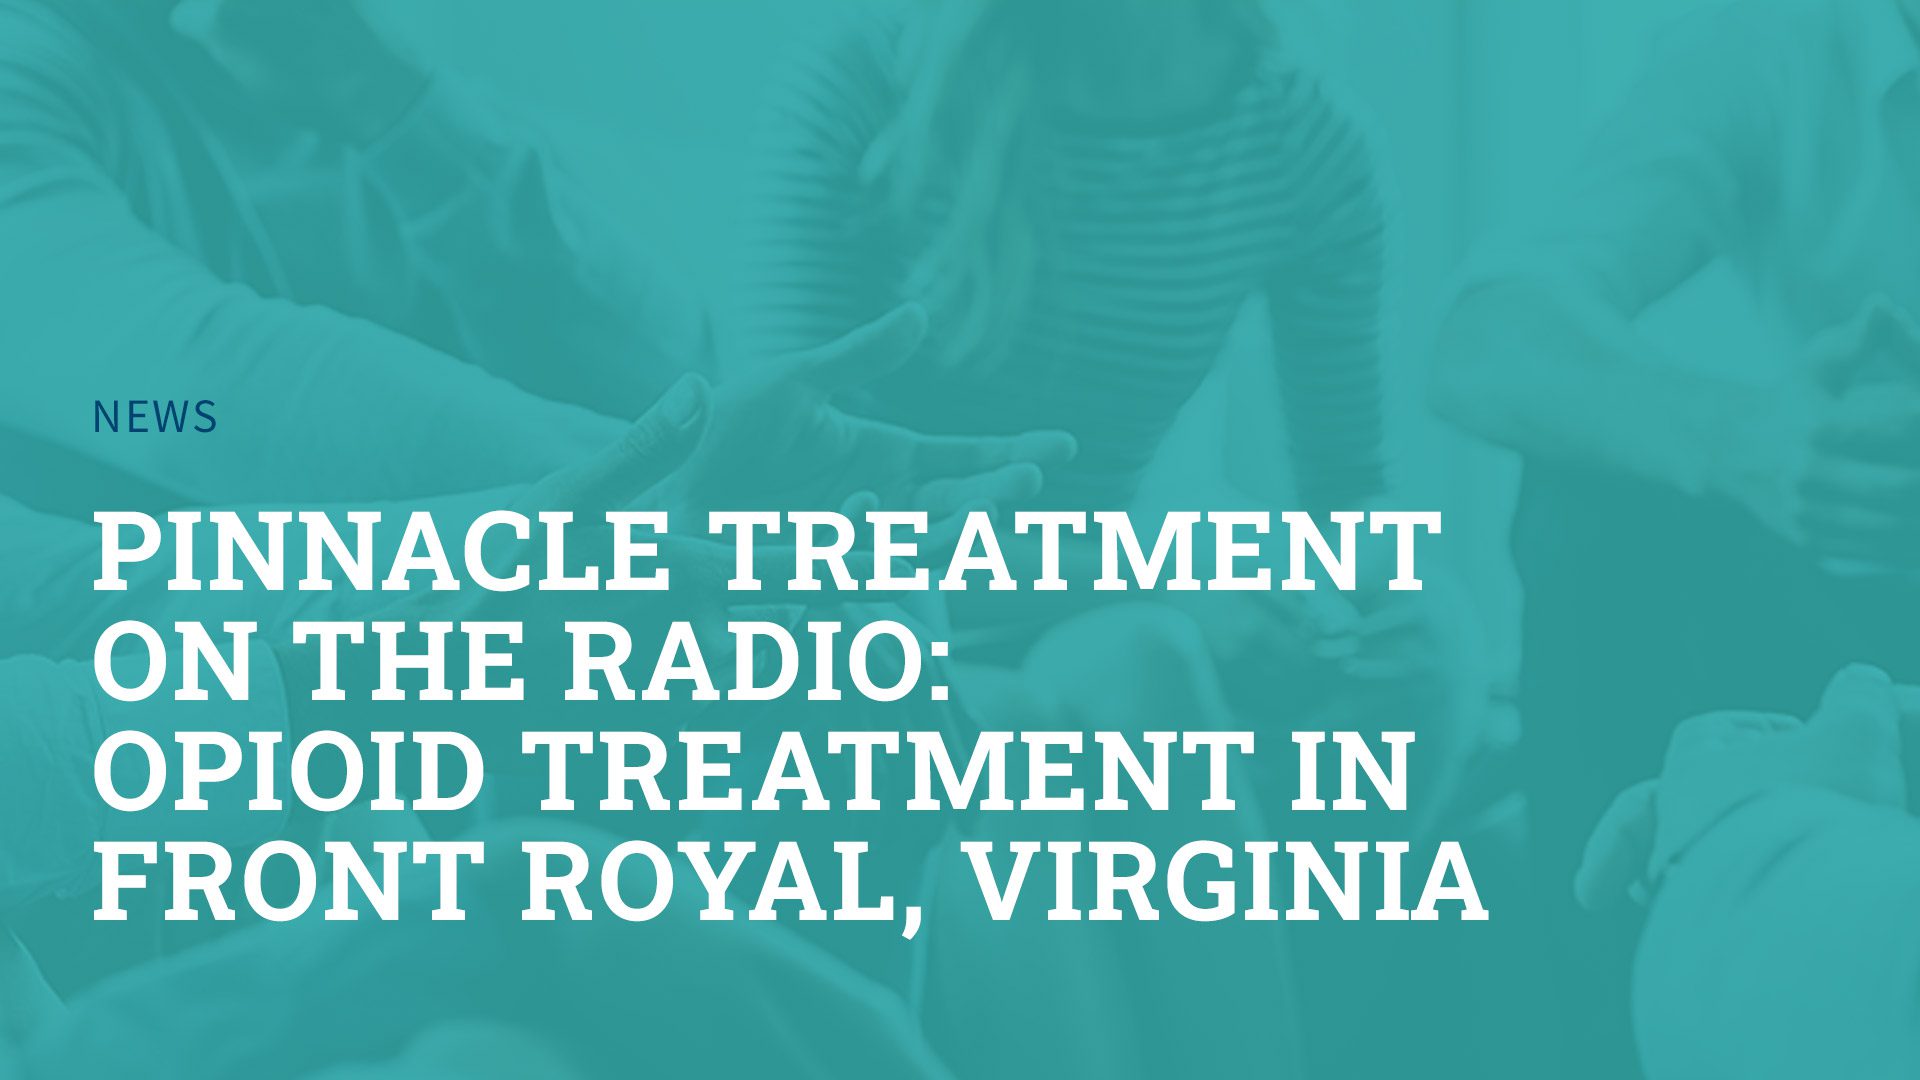 Graphic with headline "Pinnacle Treatment on the Radio: Opioid Treatment in Front Royal, Virginia"